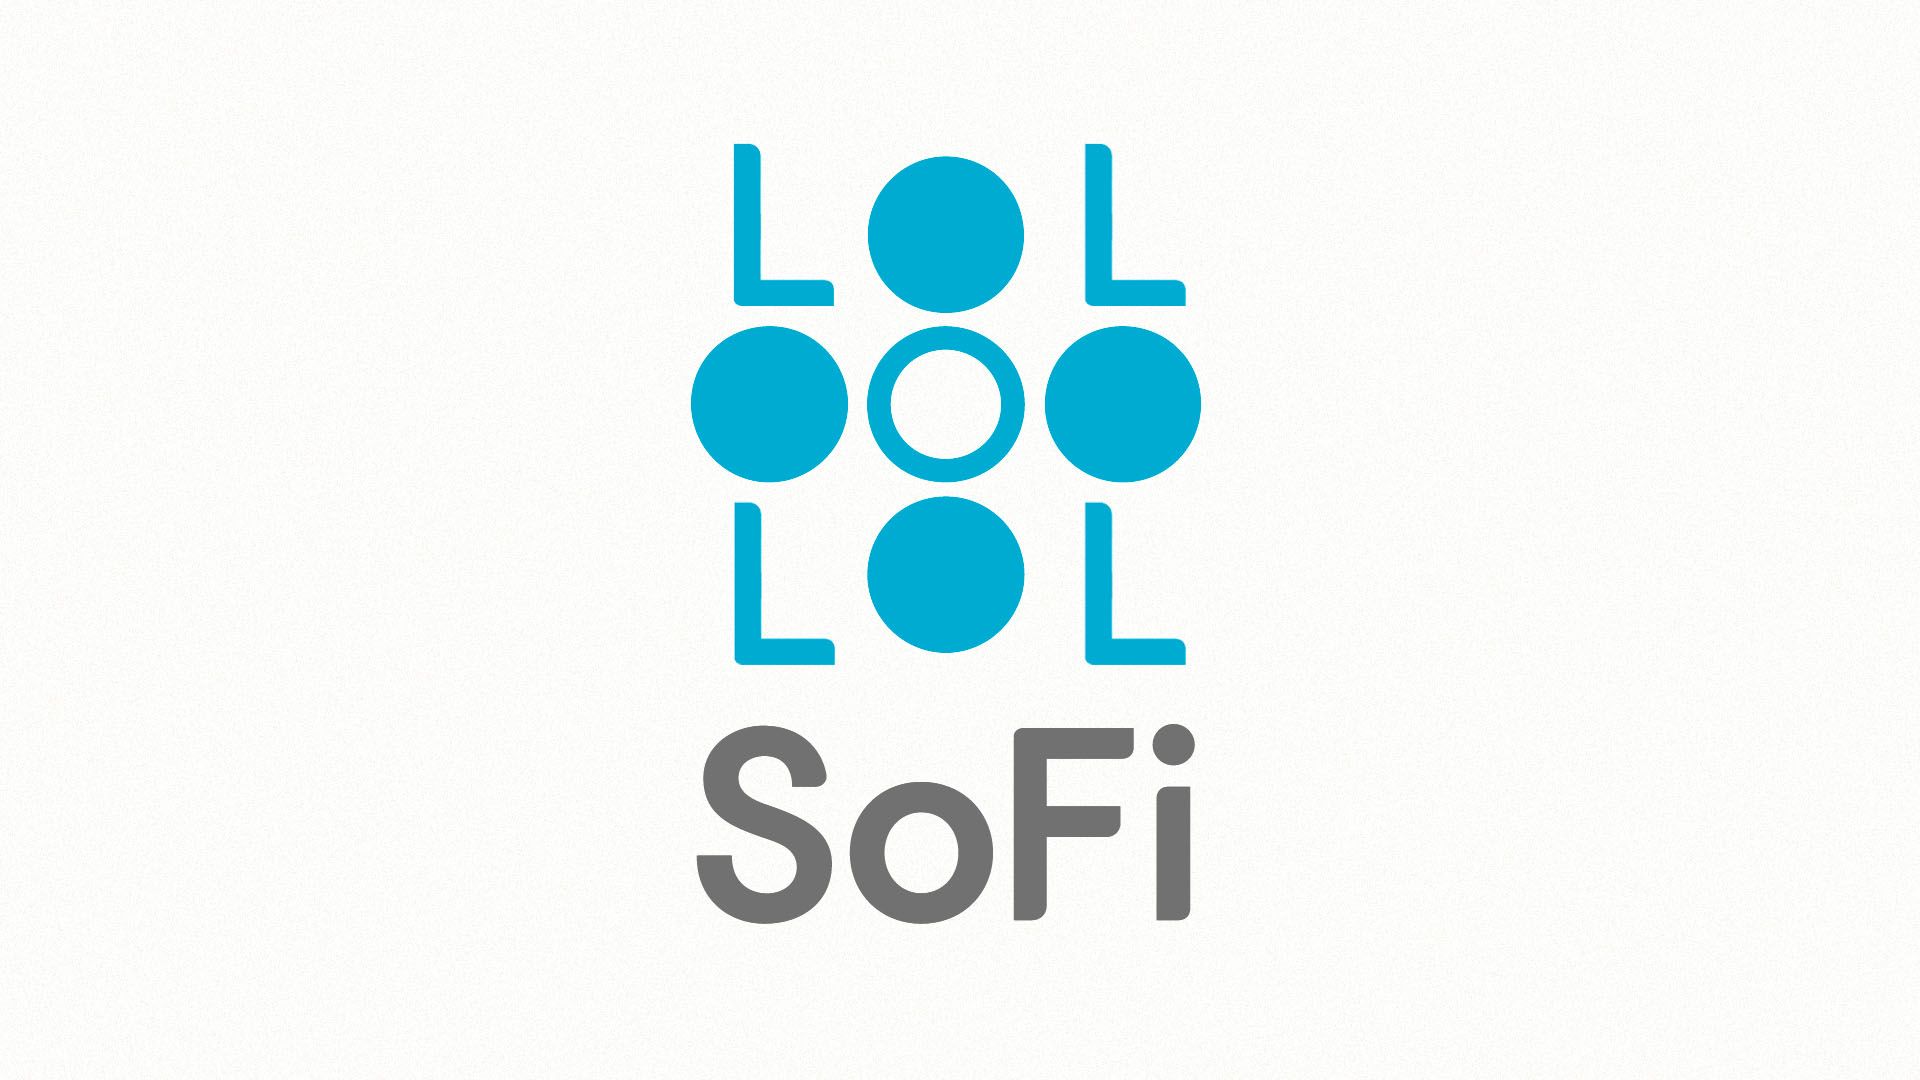 Illustration of the SoFi logo, with o's replaced with l's to read "lol"